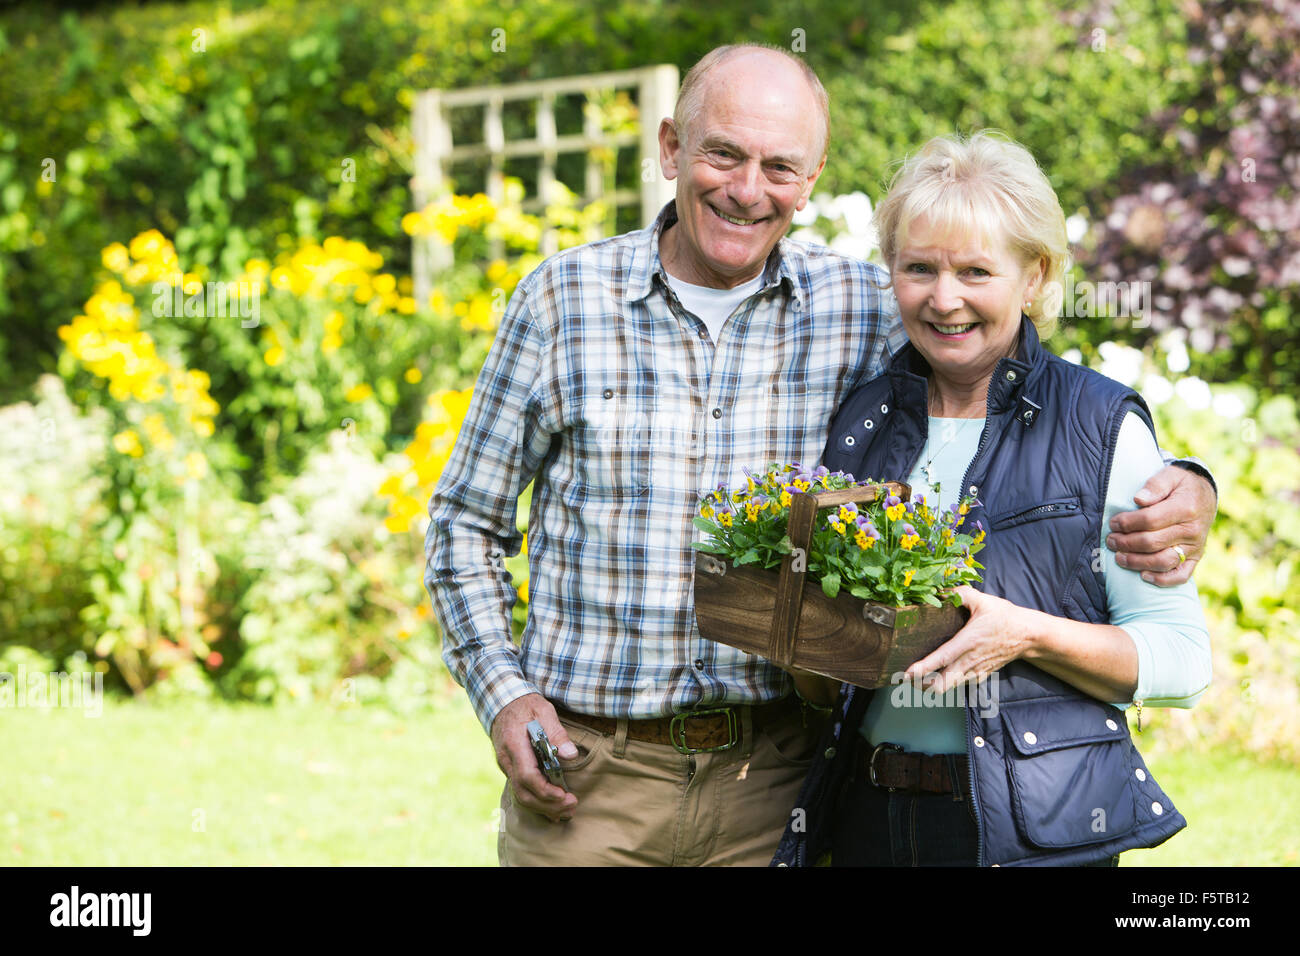 Portrait Of Senior Couple Working In Garden Together Stock Photo